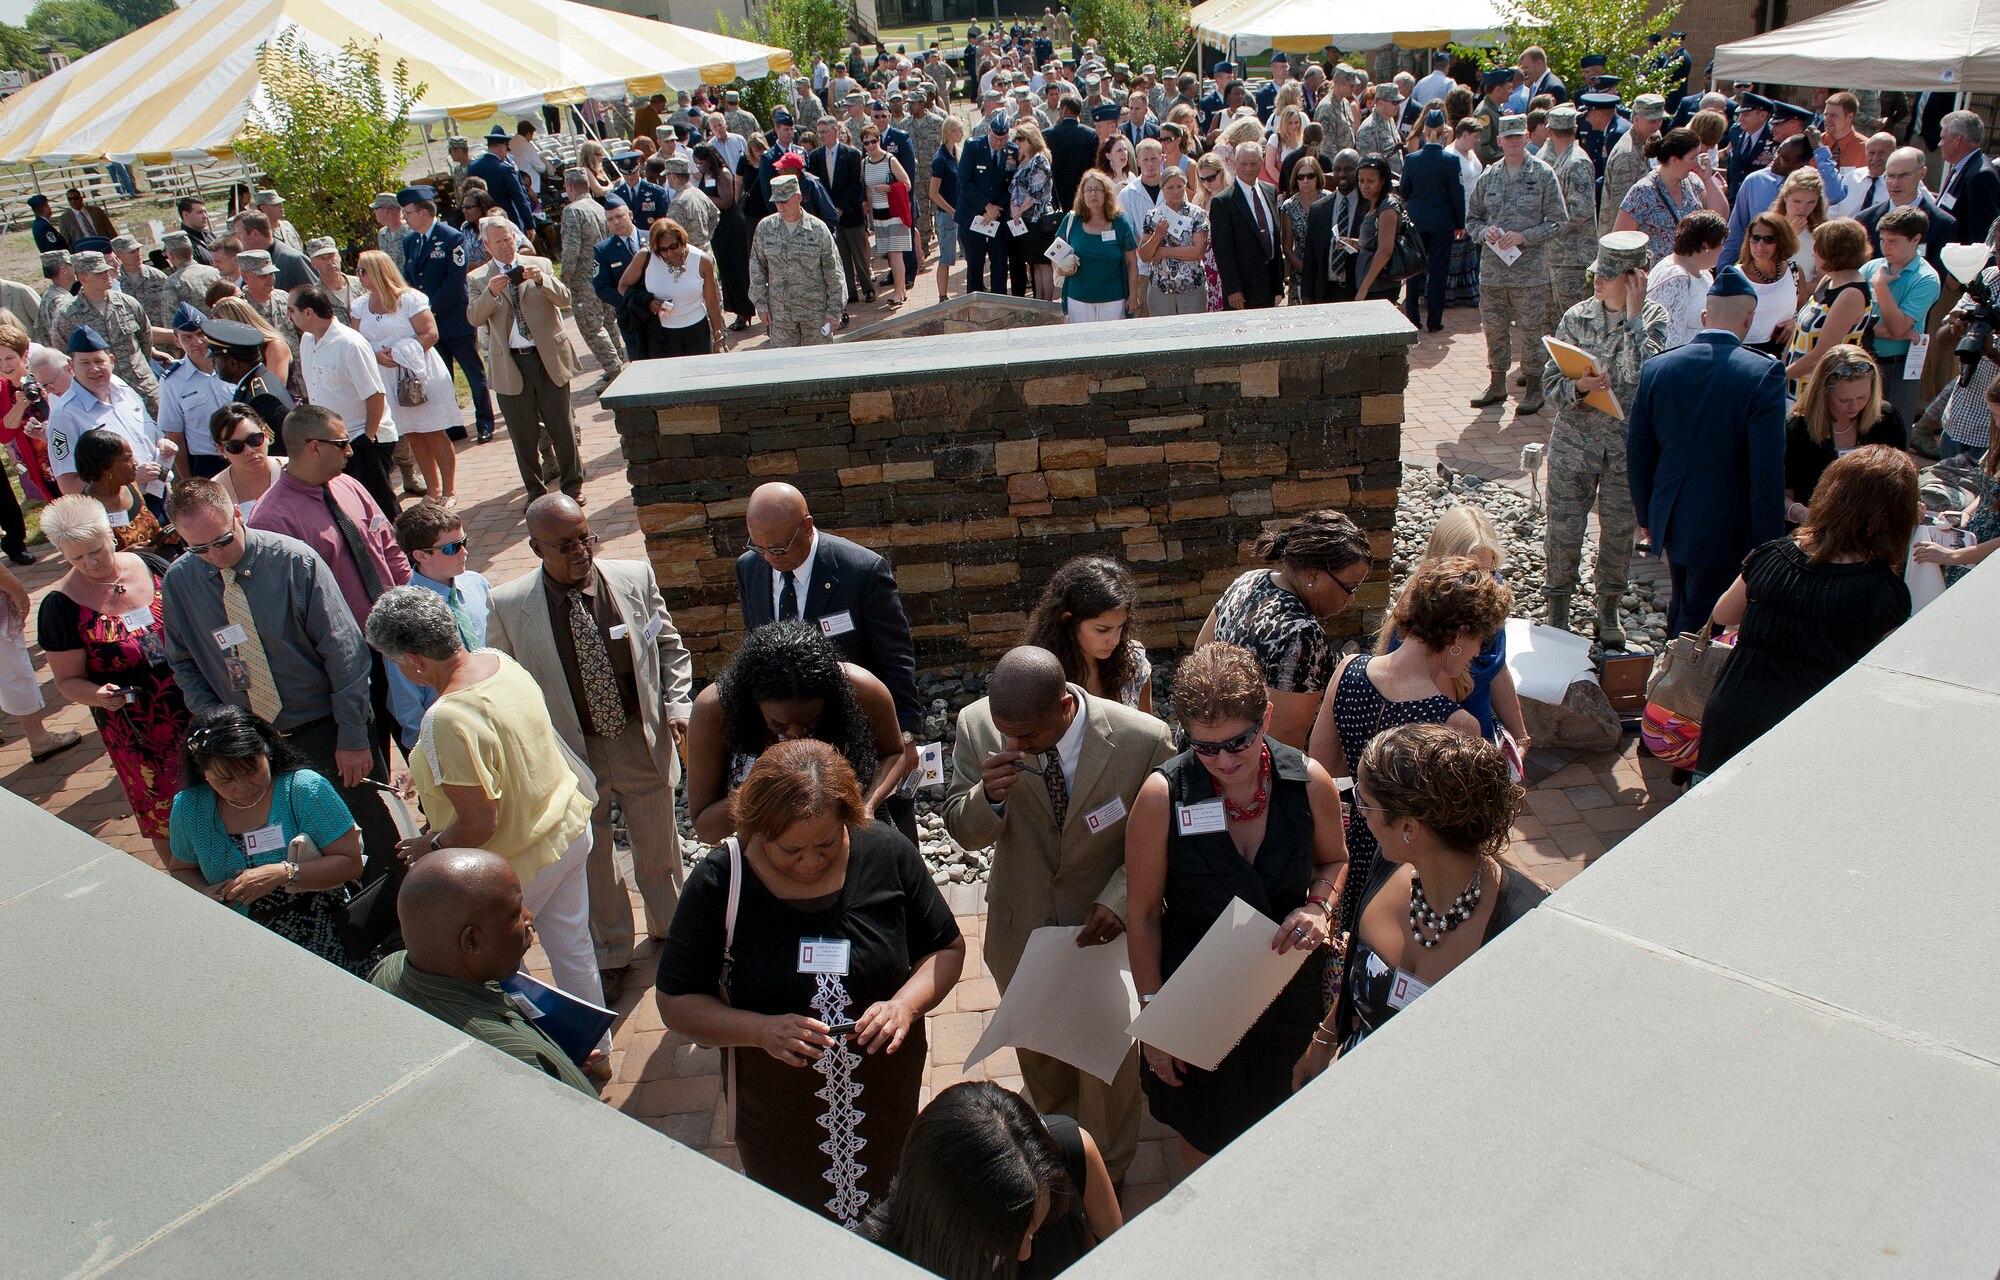 Family and friends of the nine Air Force air advisors who were killed in Afghanistan in 2011, gather at the Air Advisor Memorial at Joint Base McGuire-Dix-Lakehurst, N.J., July 27, 2012. The memorial was built through donations and volunteer labor. (U.S. Air Force photo/Senior Airman Andrew Lee)